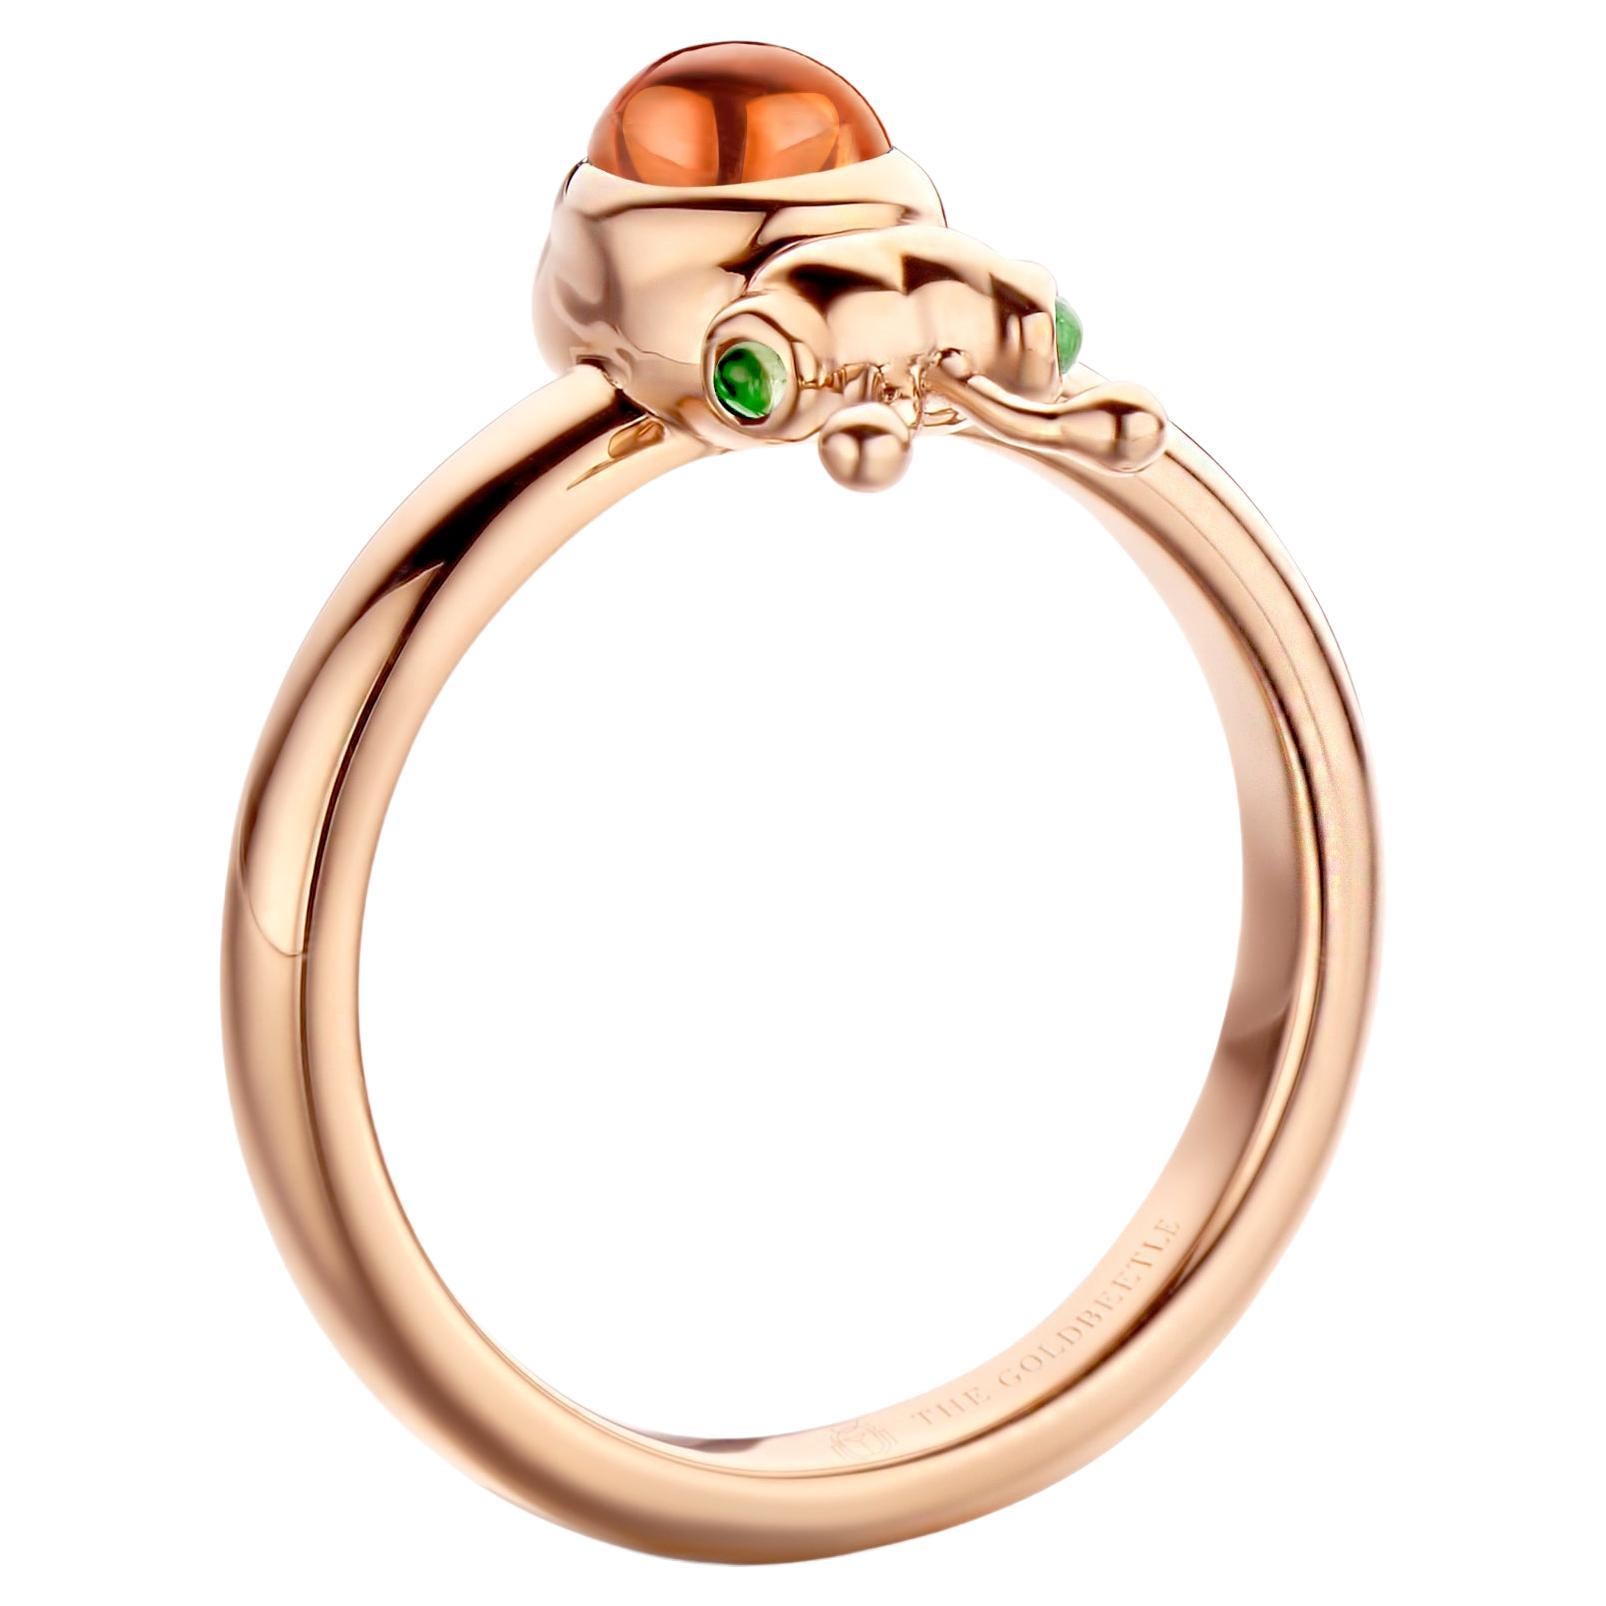 18 Karat rose gold Lilou ring set with one natural pear-shaped cabochon Mandarin Garnet and two natural Tsavorites in round cabochon cut.

Celine Roelens, a goldsmith and gemologist, specializes in unique, fine jewelry, handmade in Belgium and